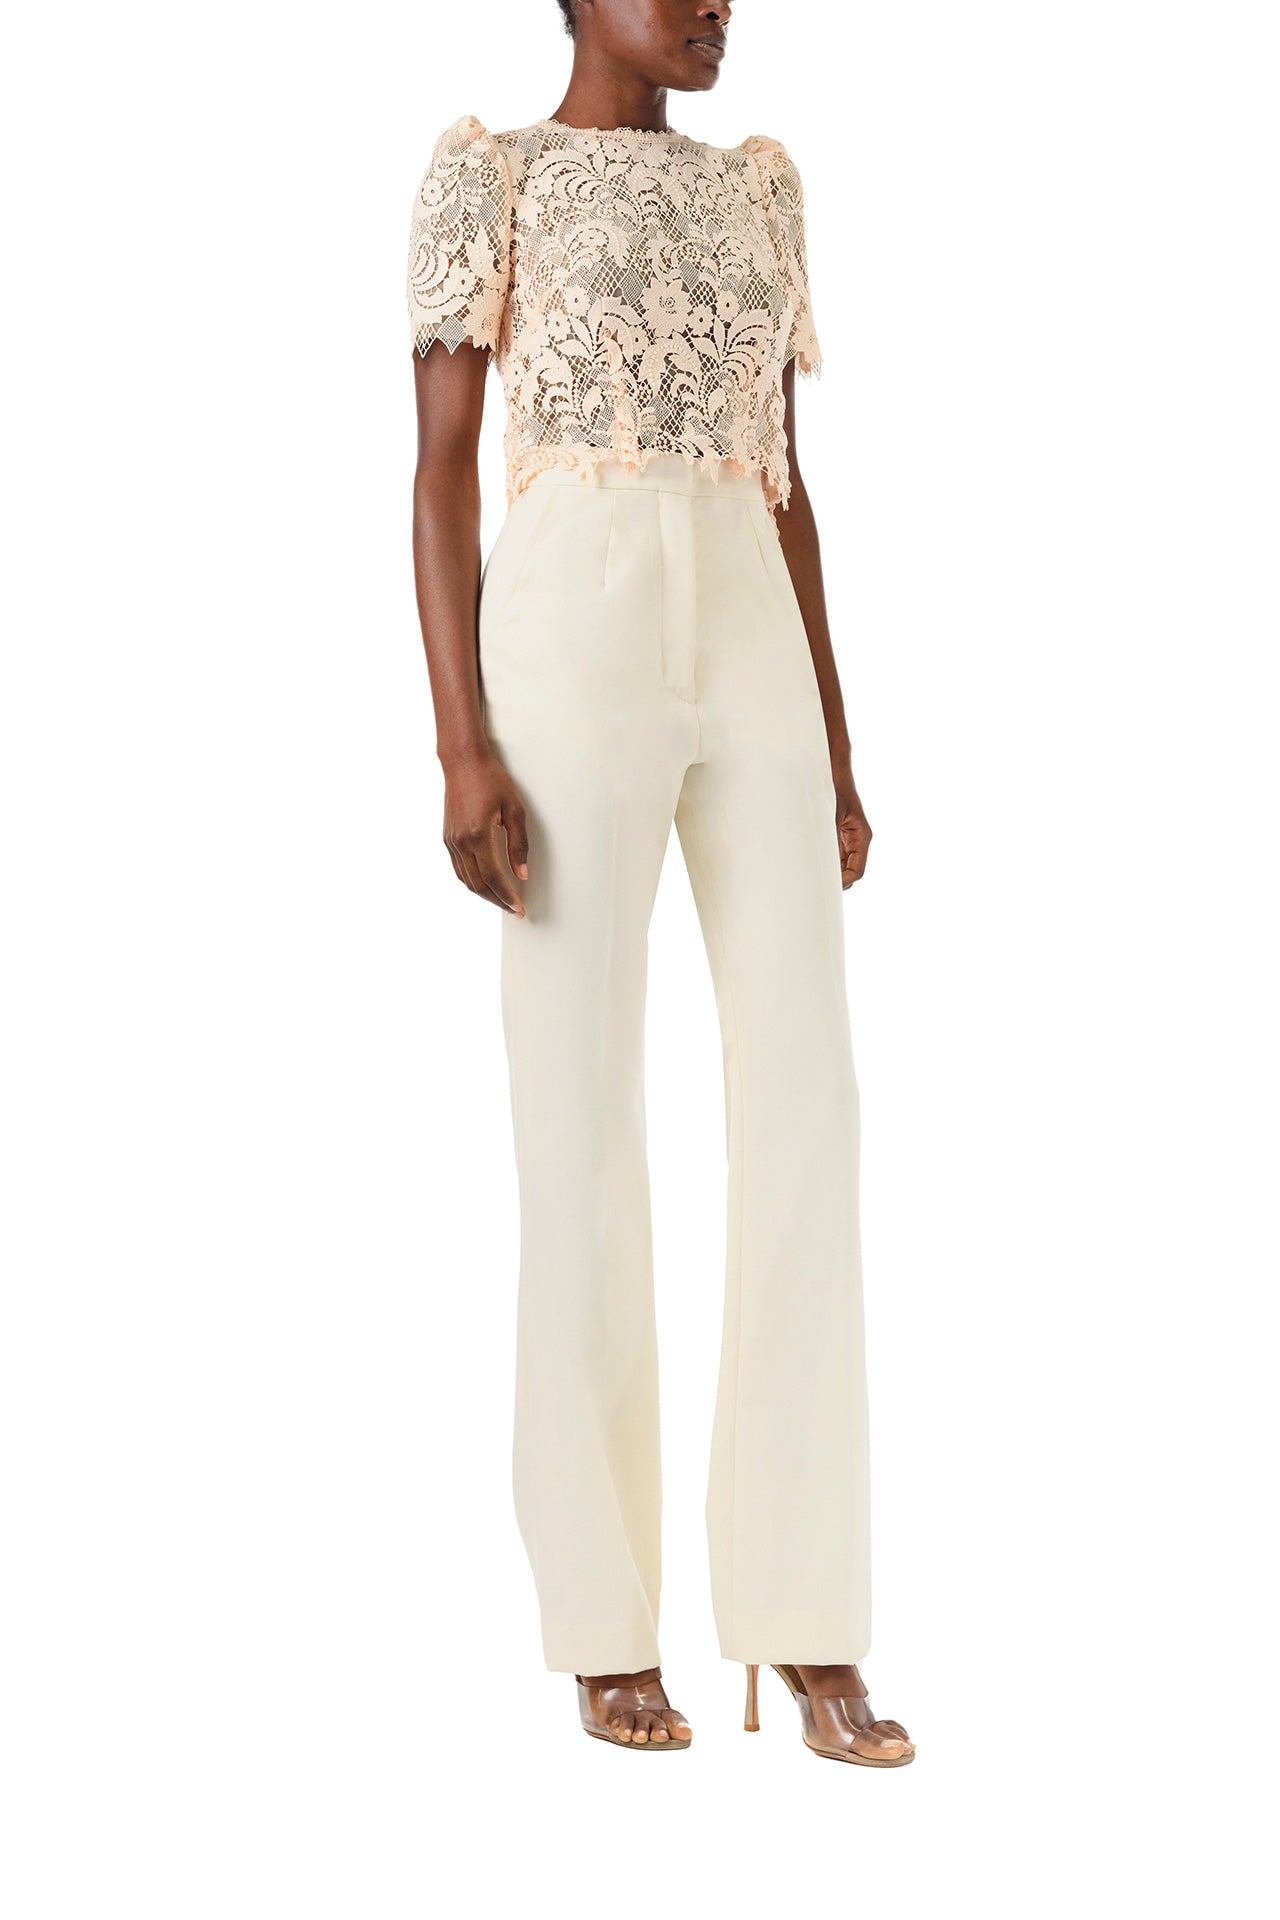 Monique Lhuillier Spring 2024 blush lace short sleeve, jewel neck lace top with sculpted shoulder and lace scallop detailing - right side.